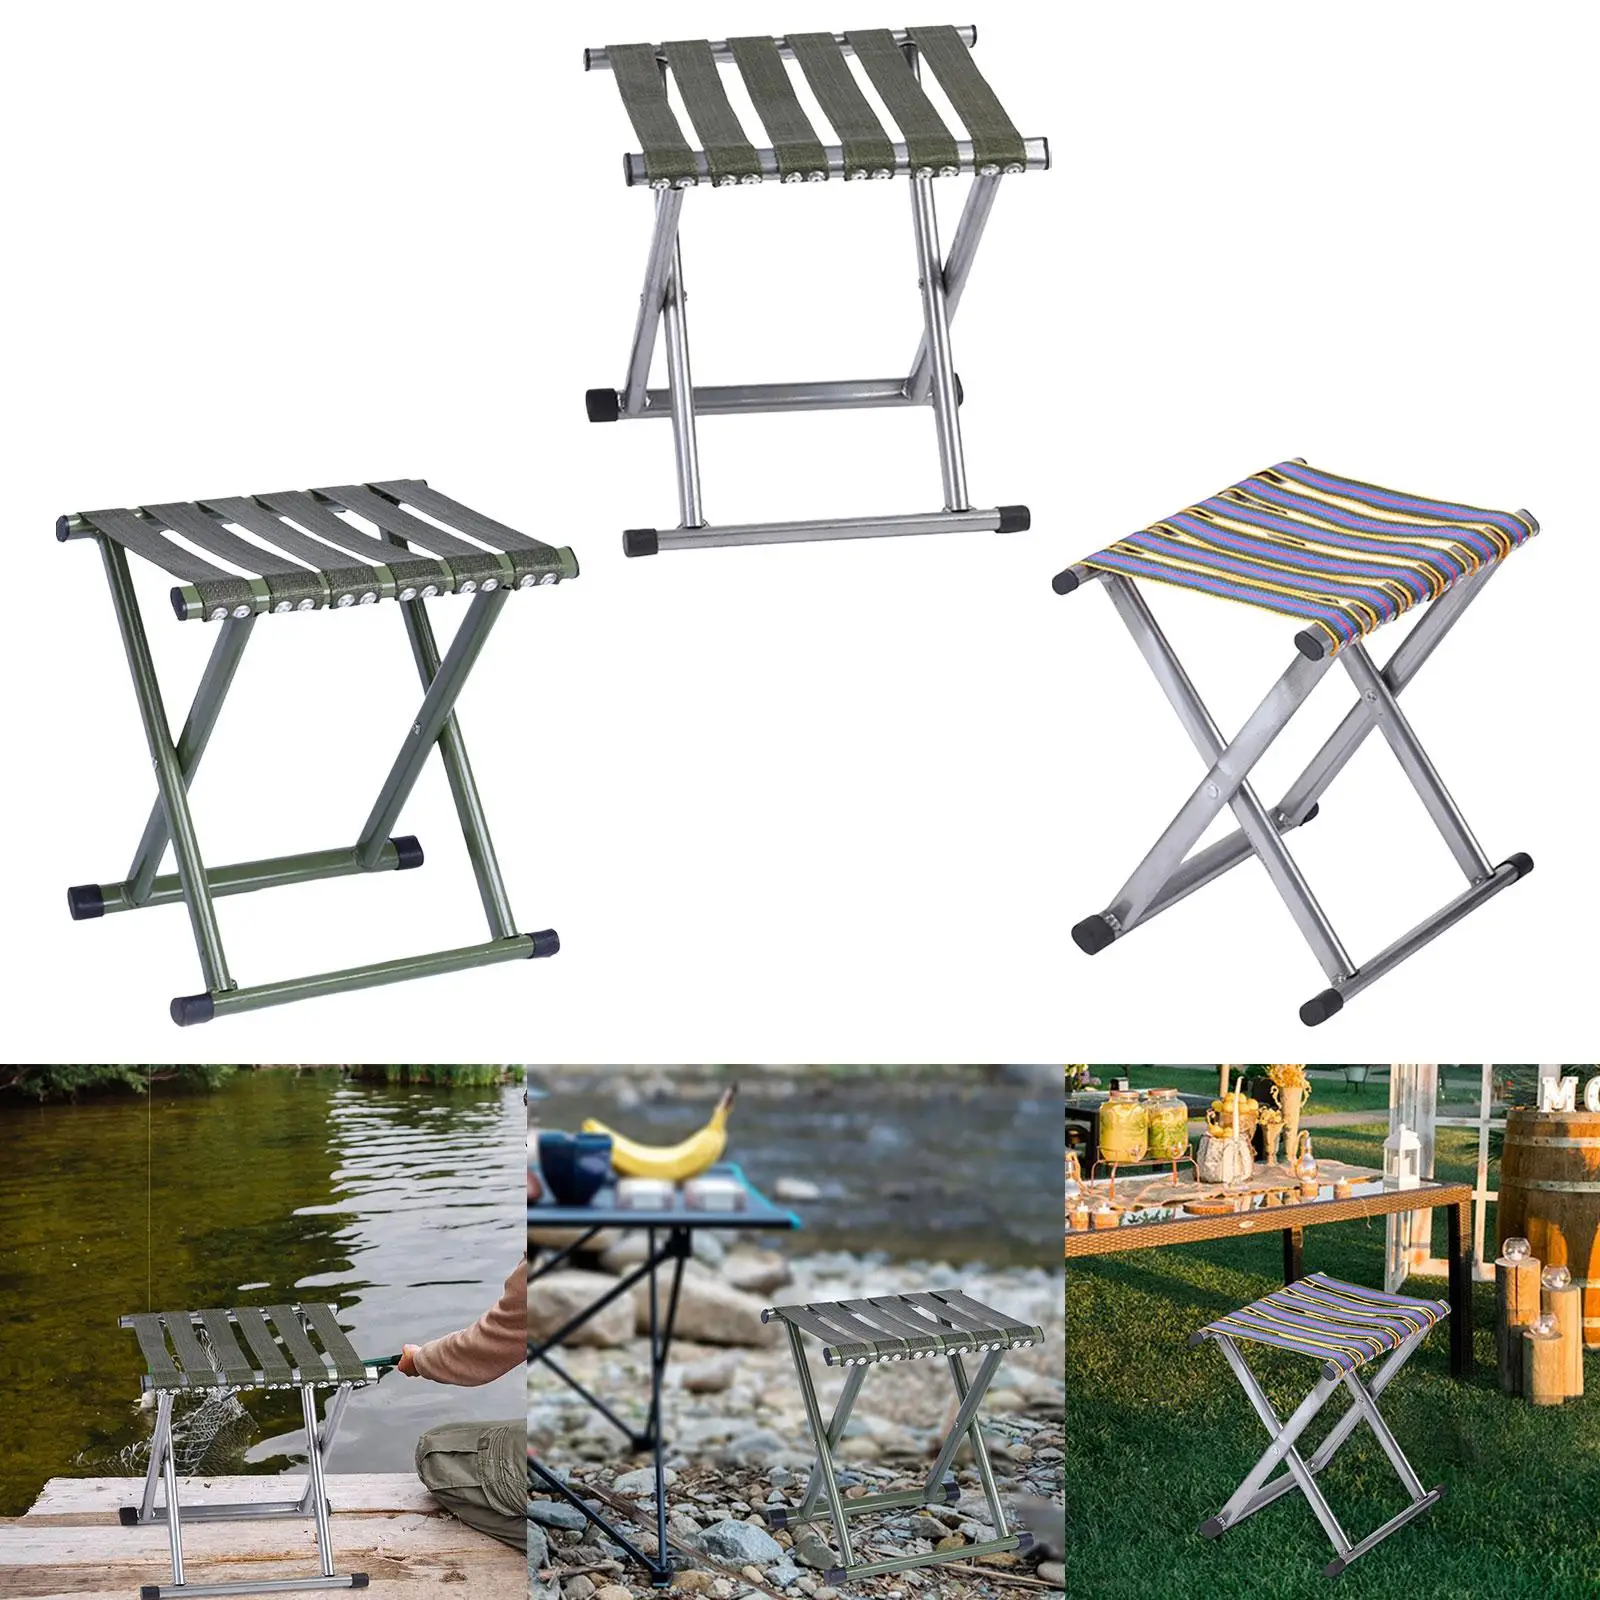 Folding Camping Stool Foldable Chair Portable recliner Foot Rest Foldable